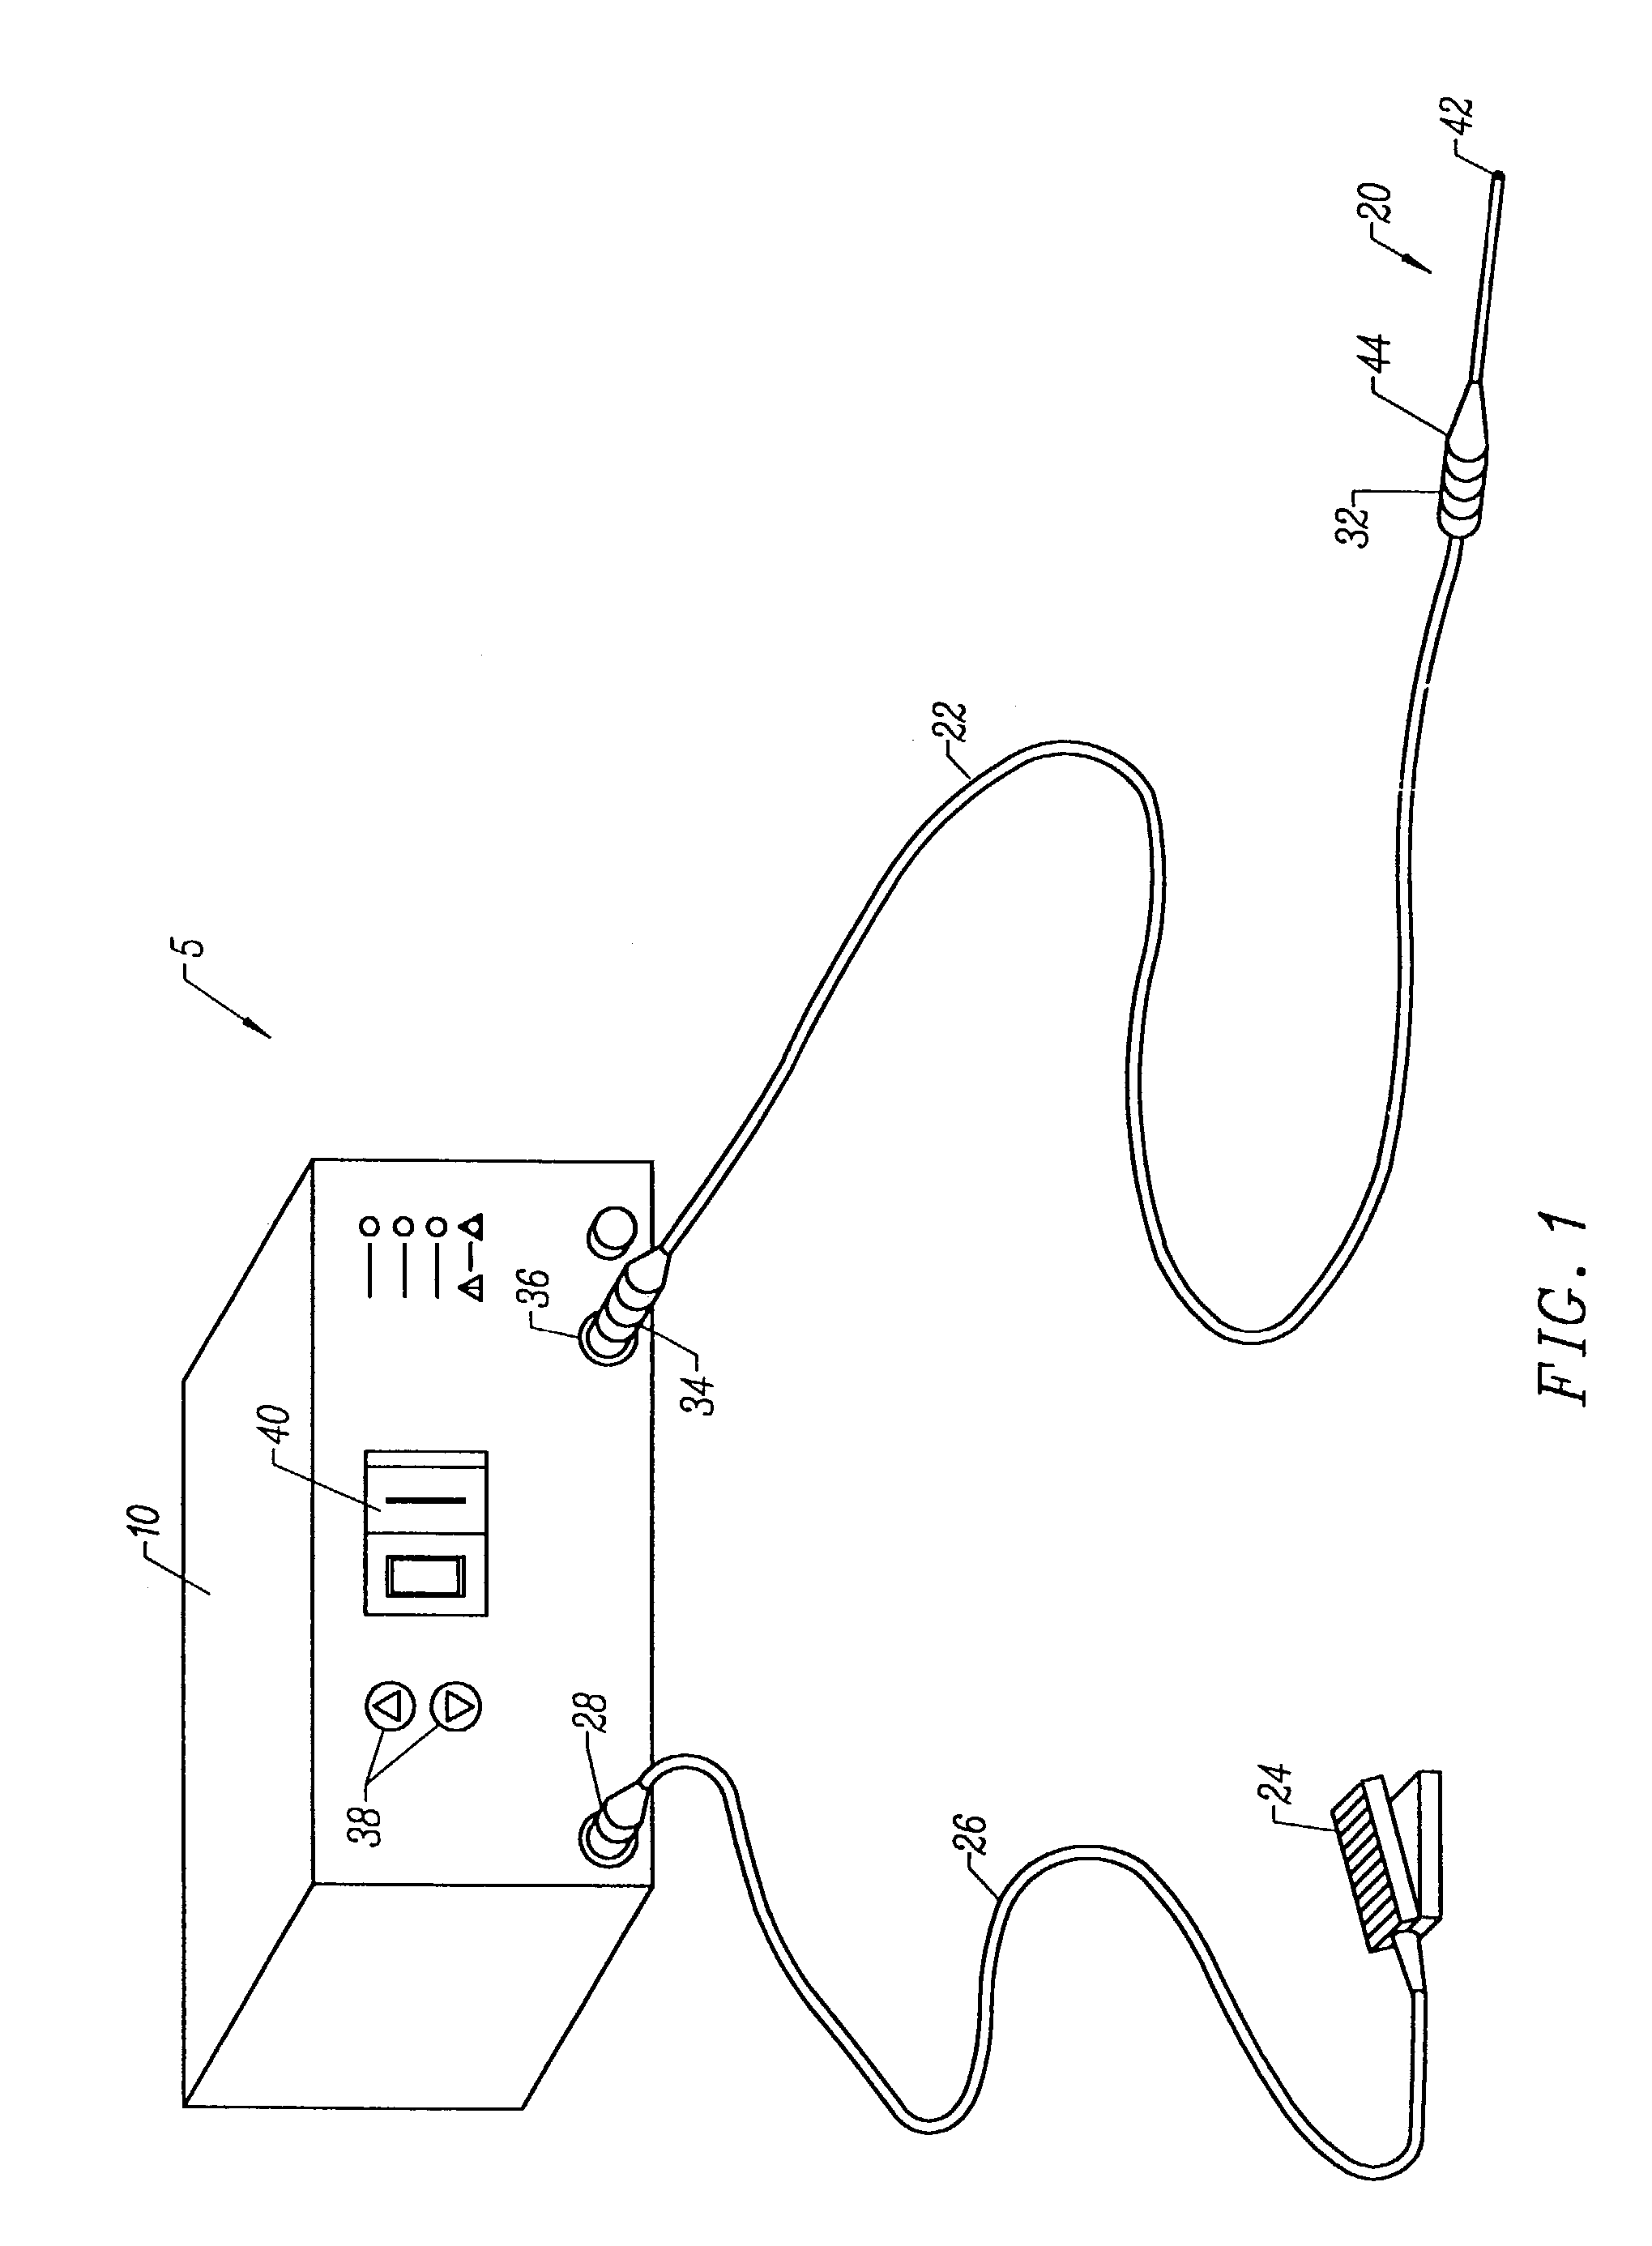 Systems and methods for electrosurgical tissue contraction